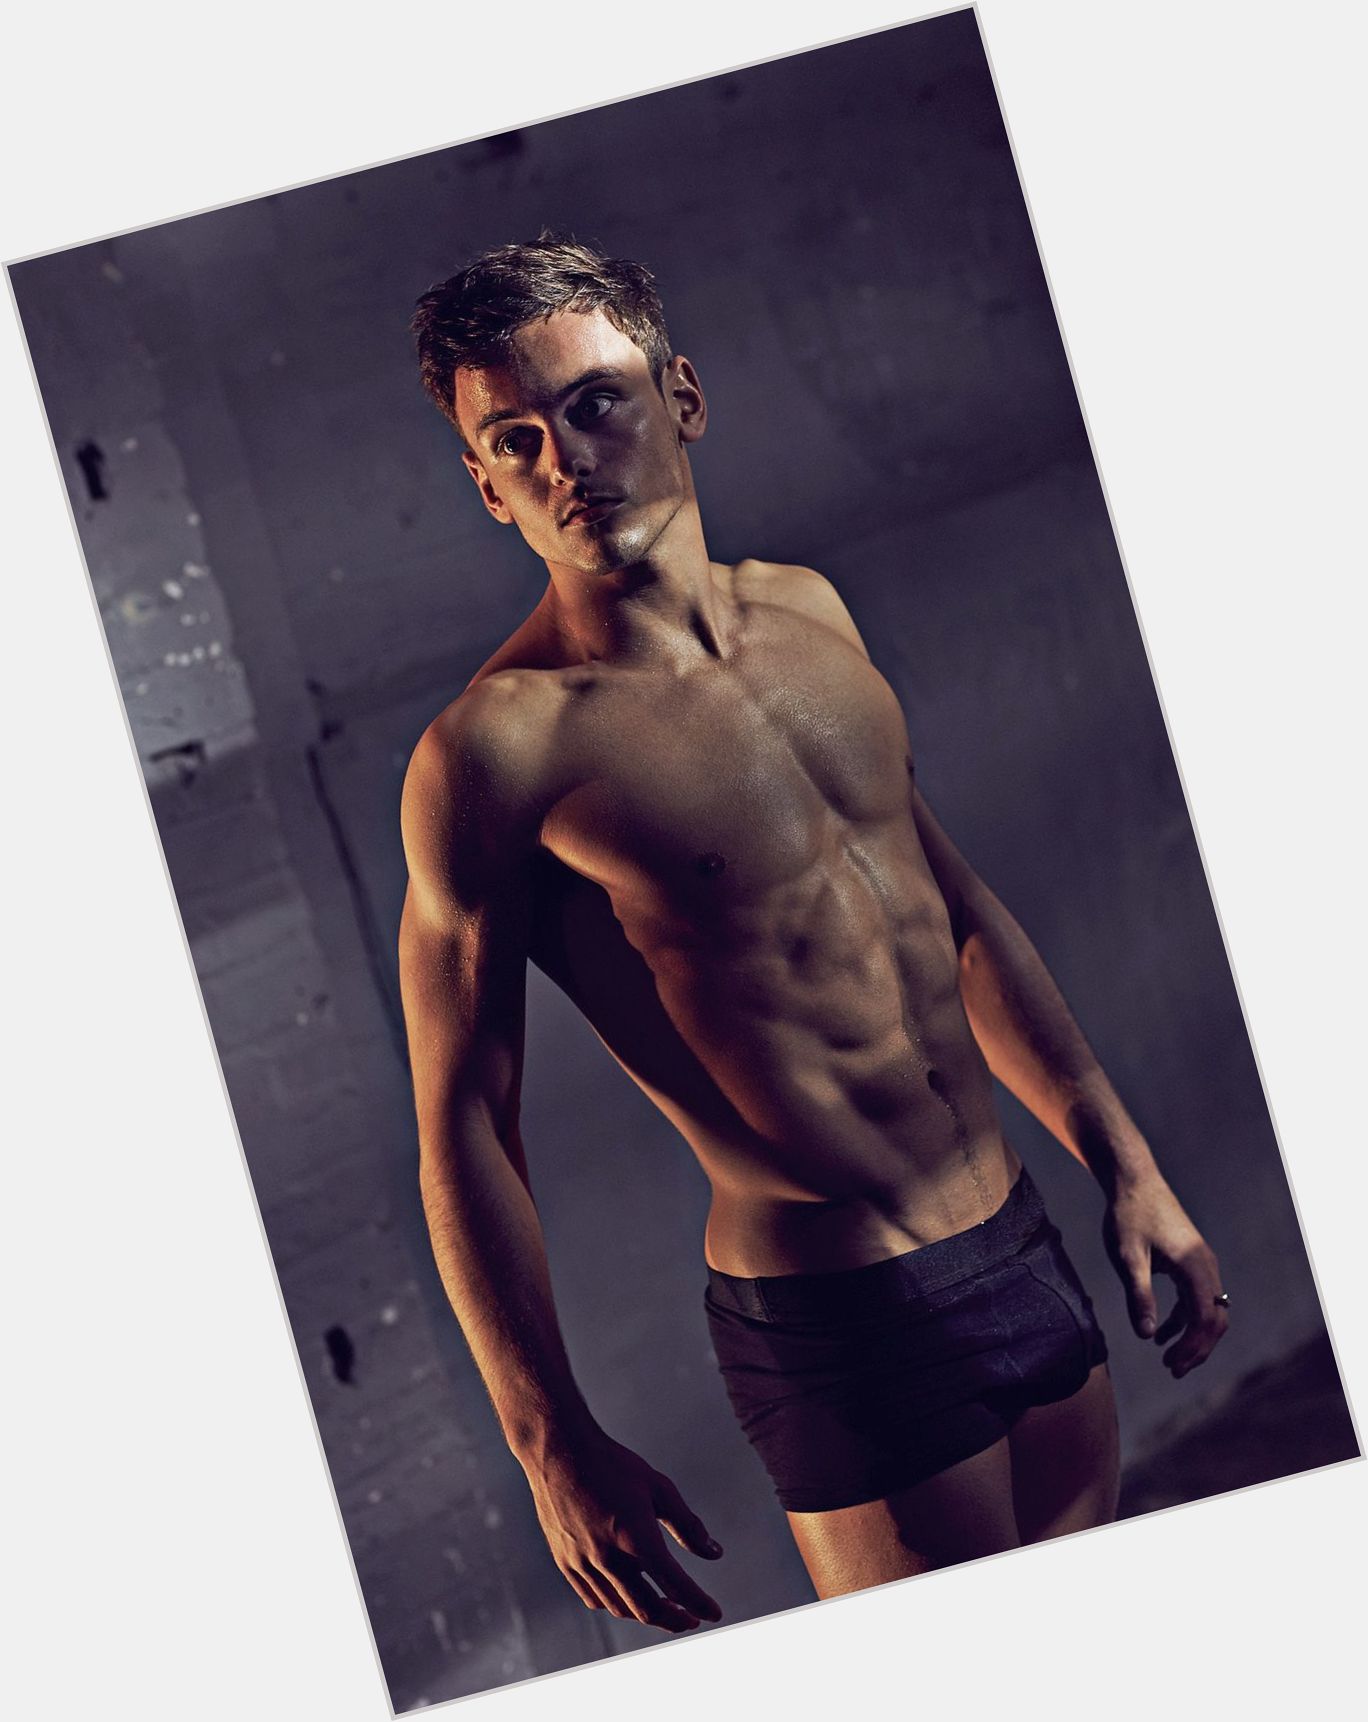 <a href="/hot-men/tom-daly/is-he-daley-competing-commonwealth-games-diving-dead">Tom Daly</a>  